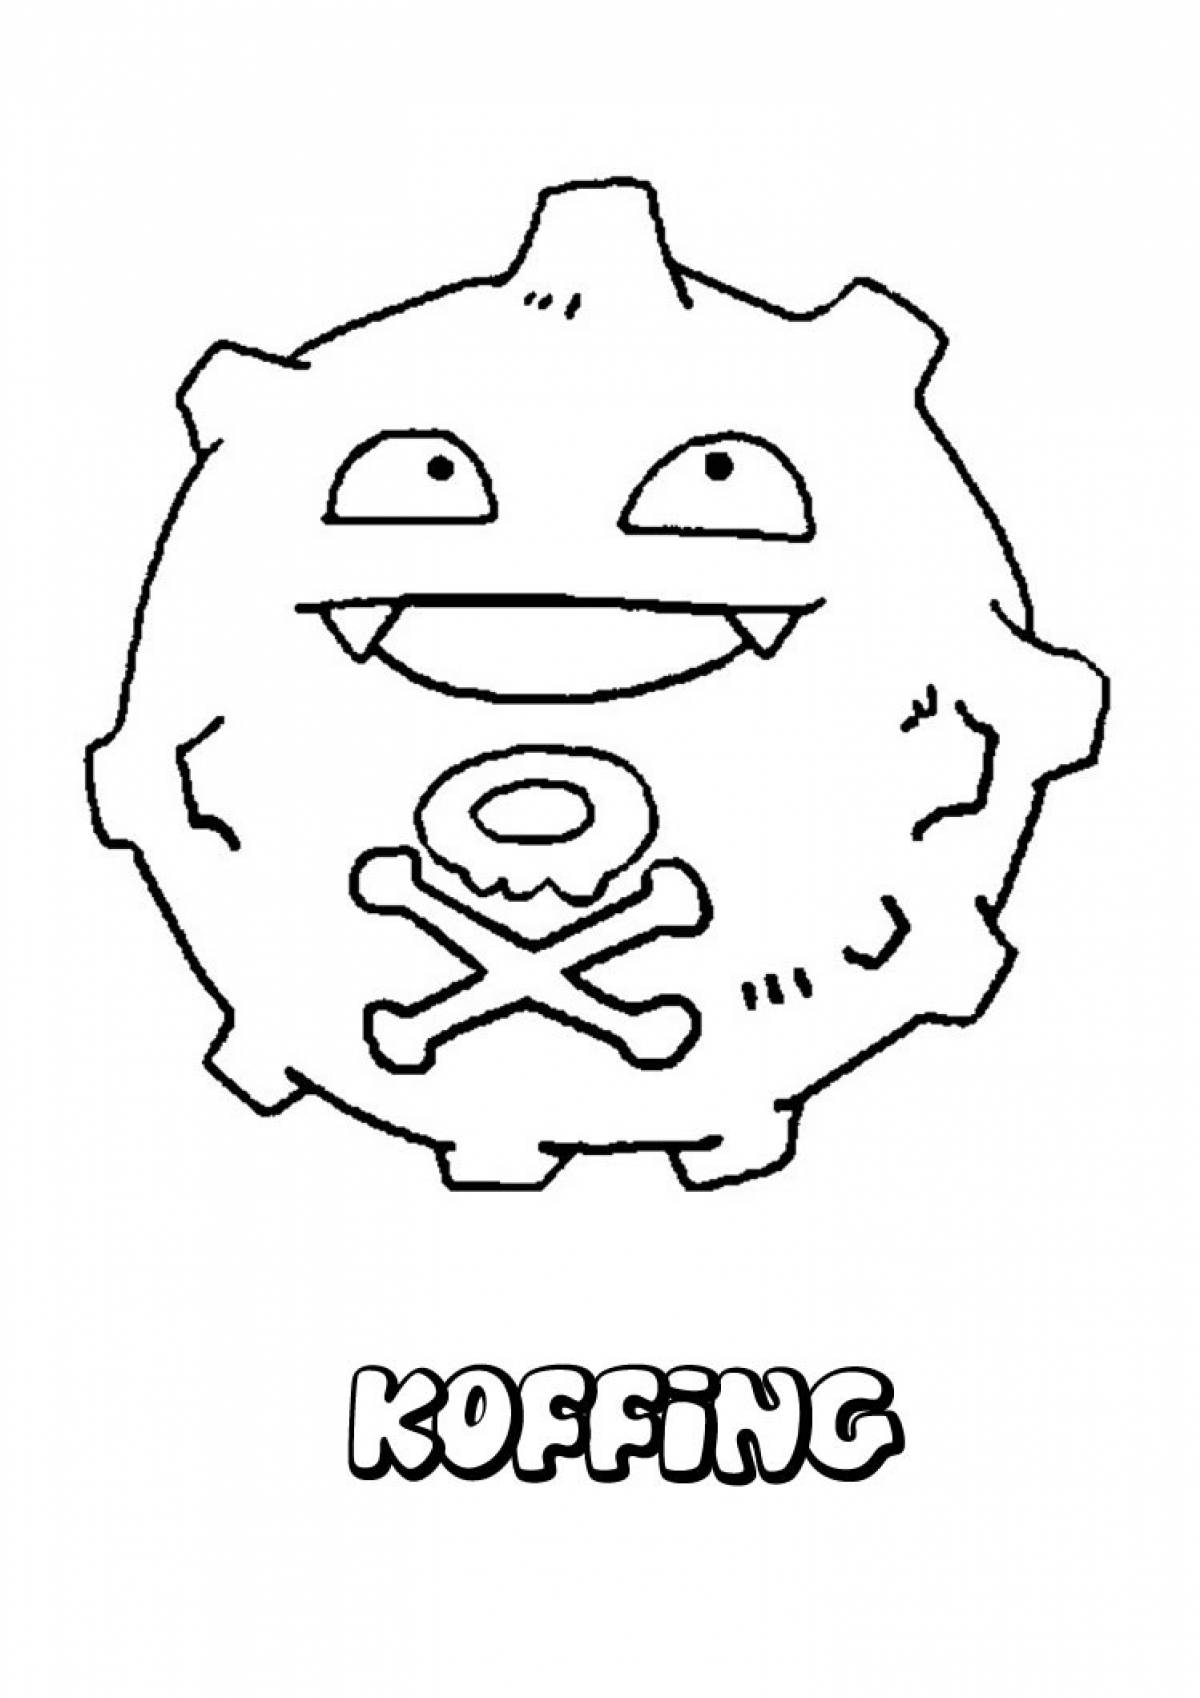 Pokemon coffing coloring pages